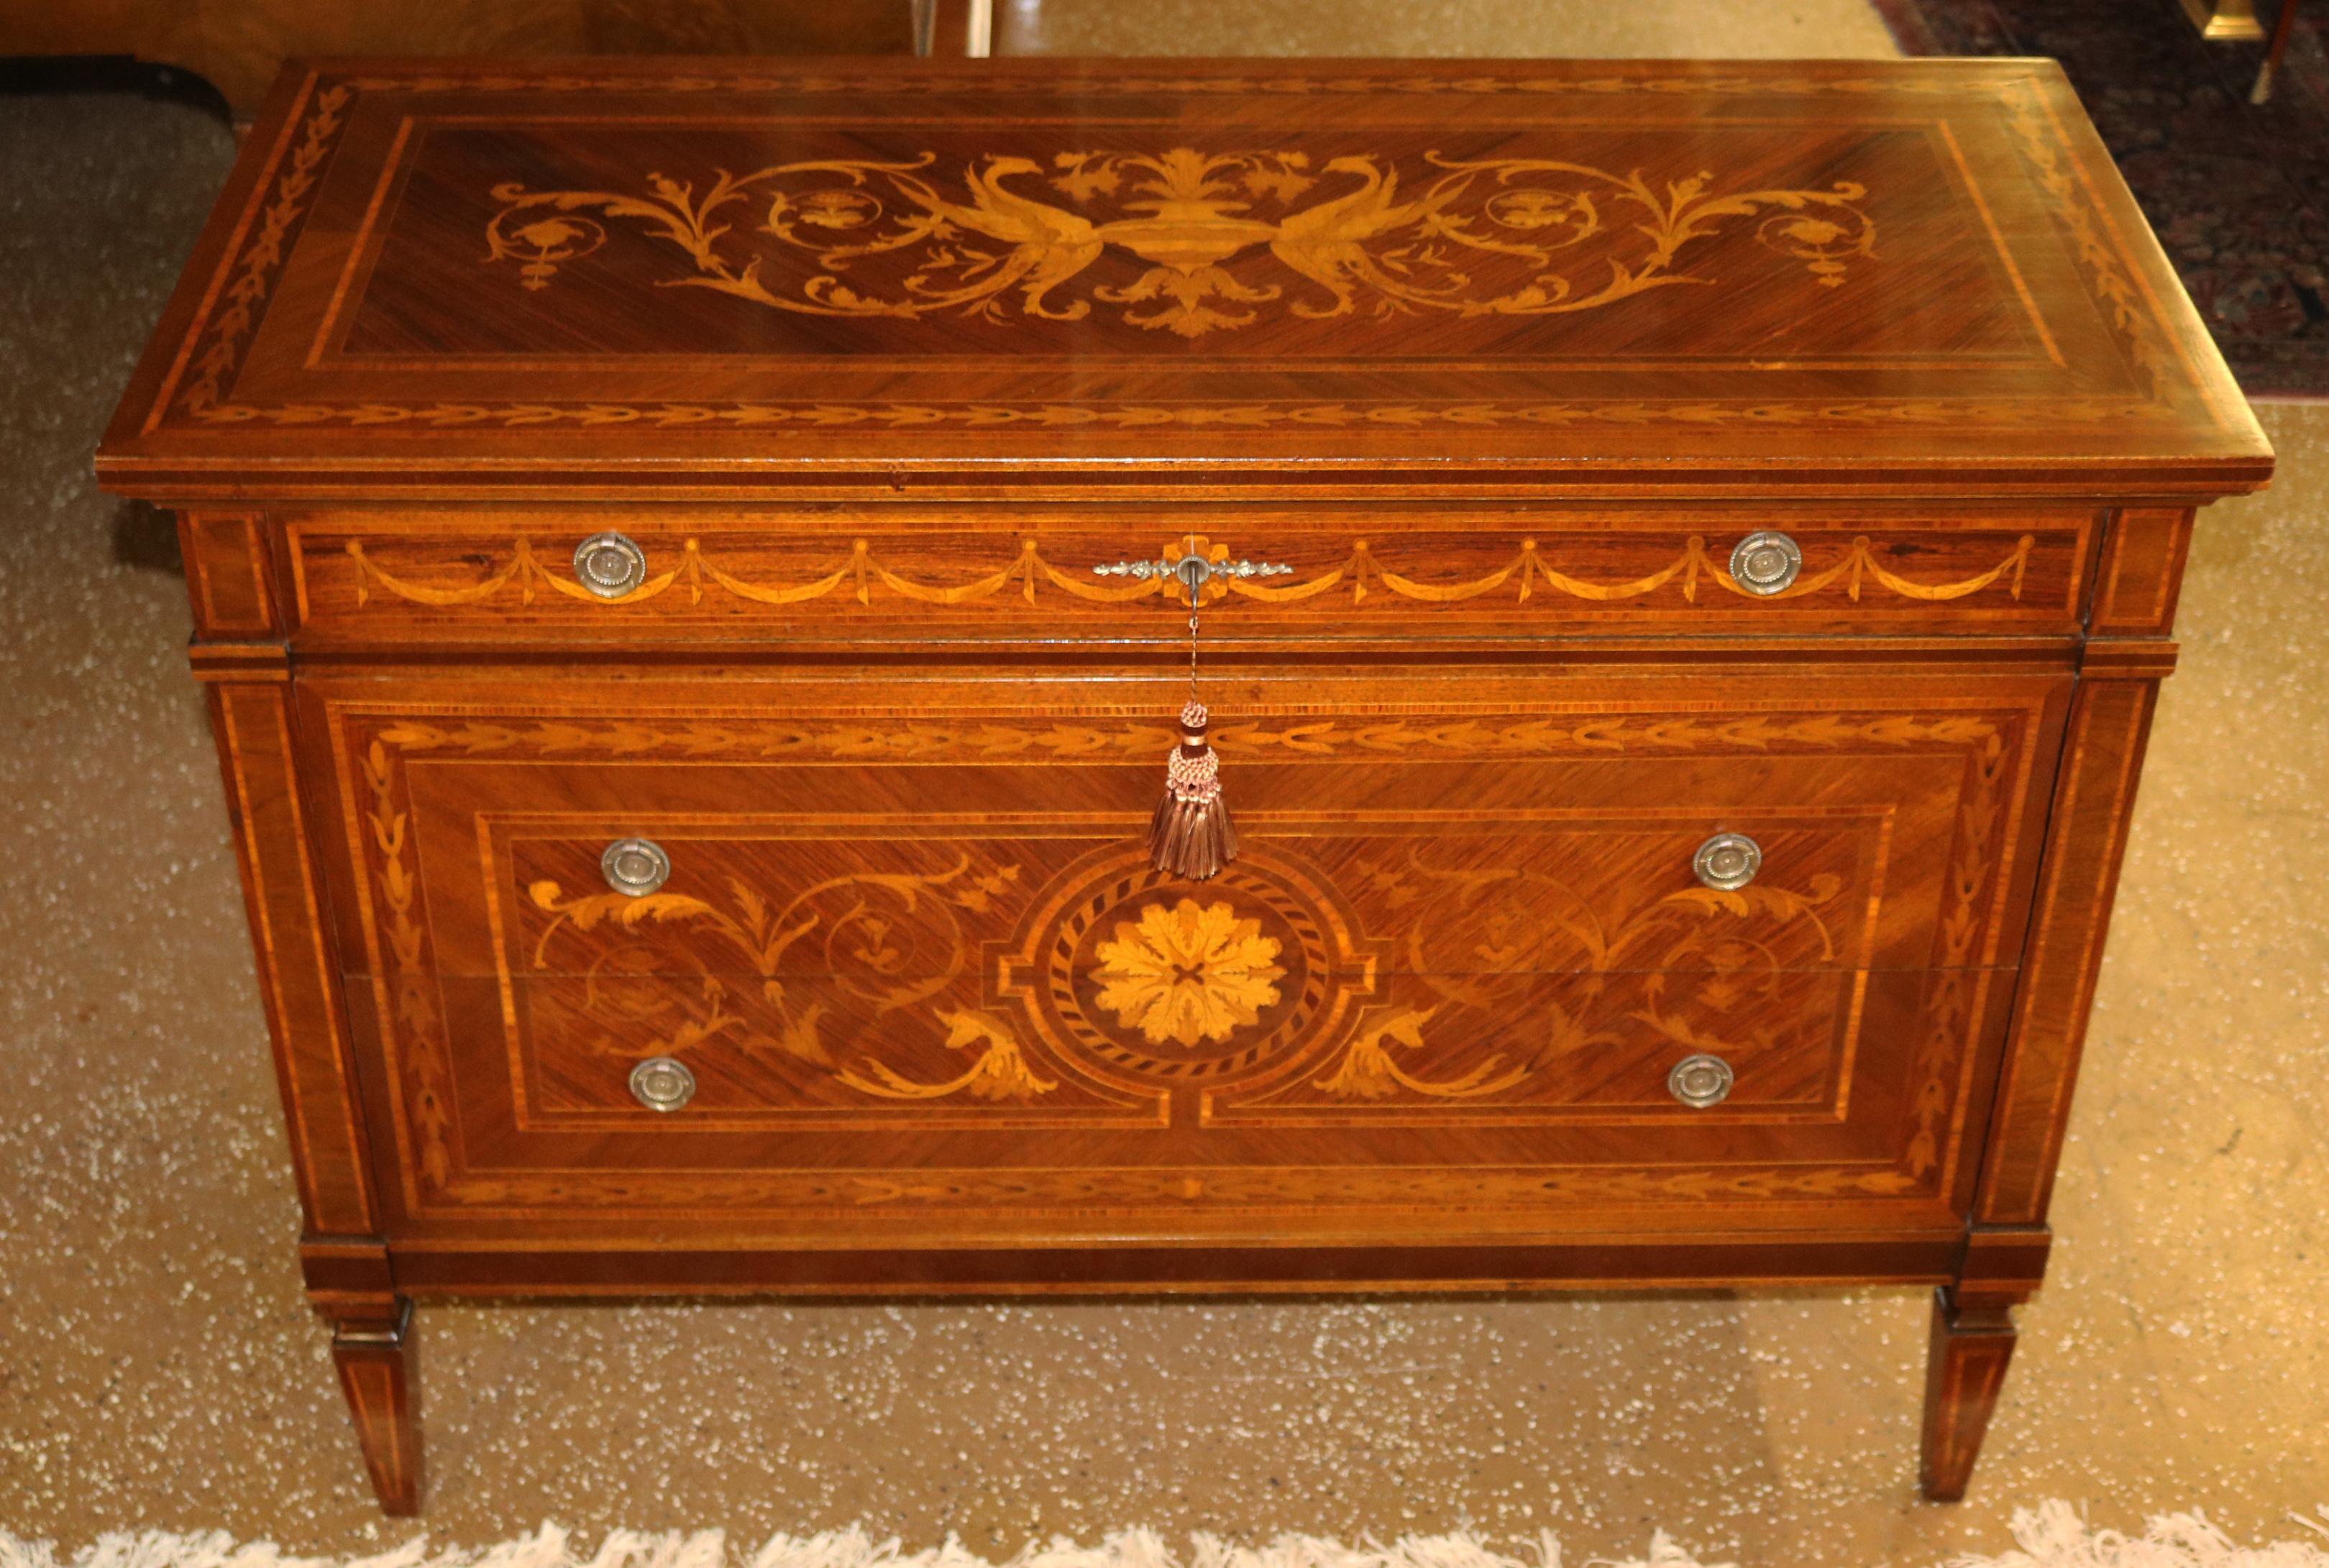 Gorgeous Italian Inlaid Rosewood Commode Dresser Chest of Drawers

Dimensions : 49.5